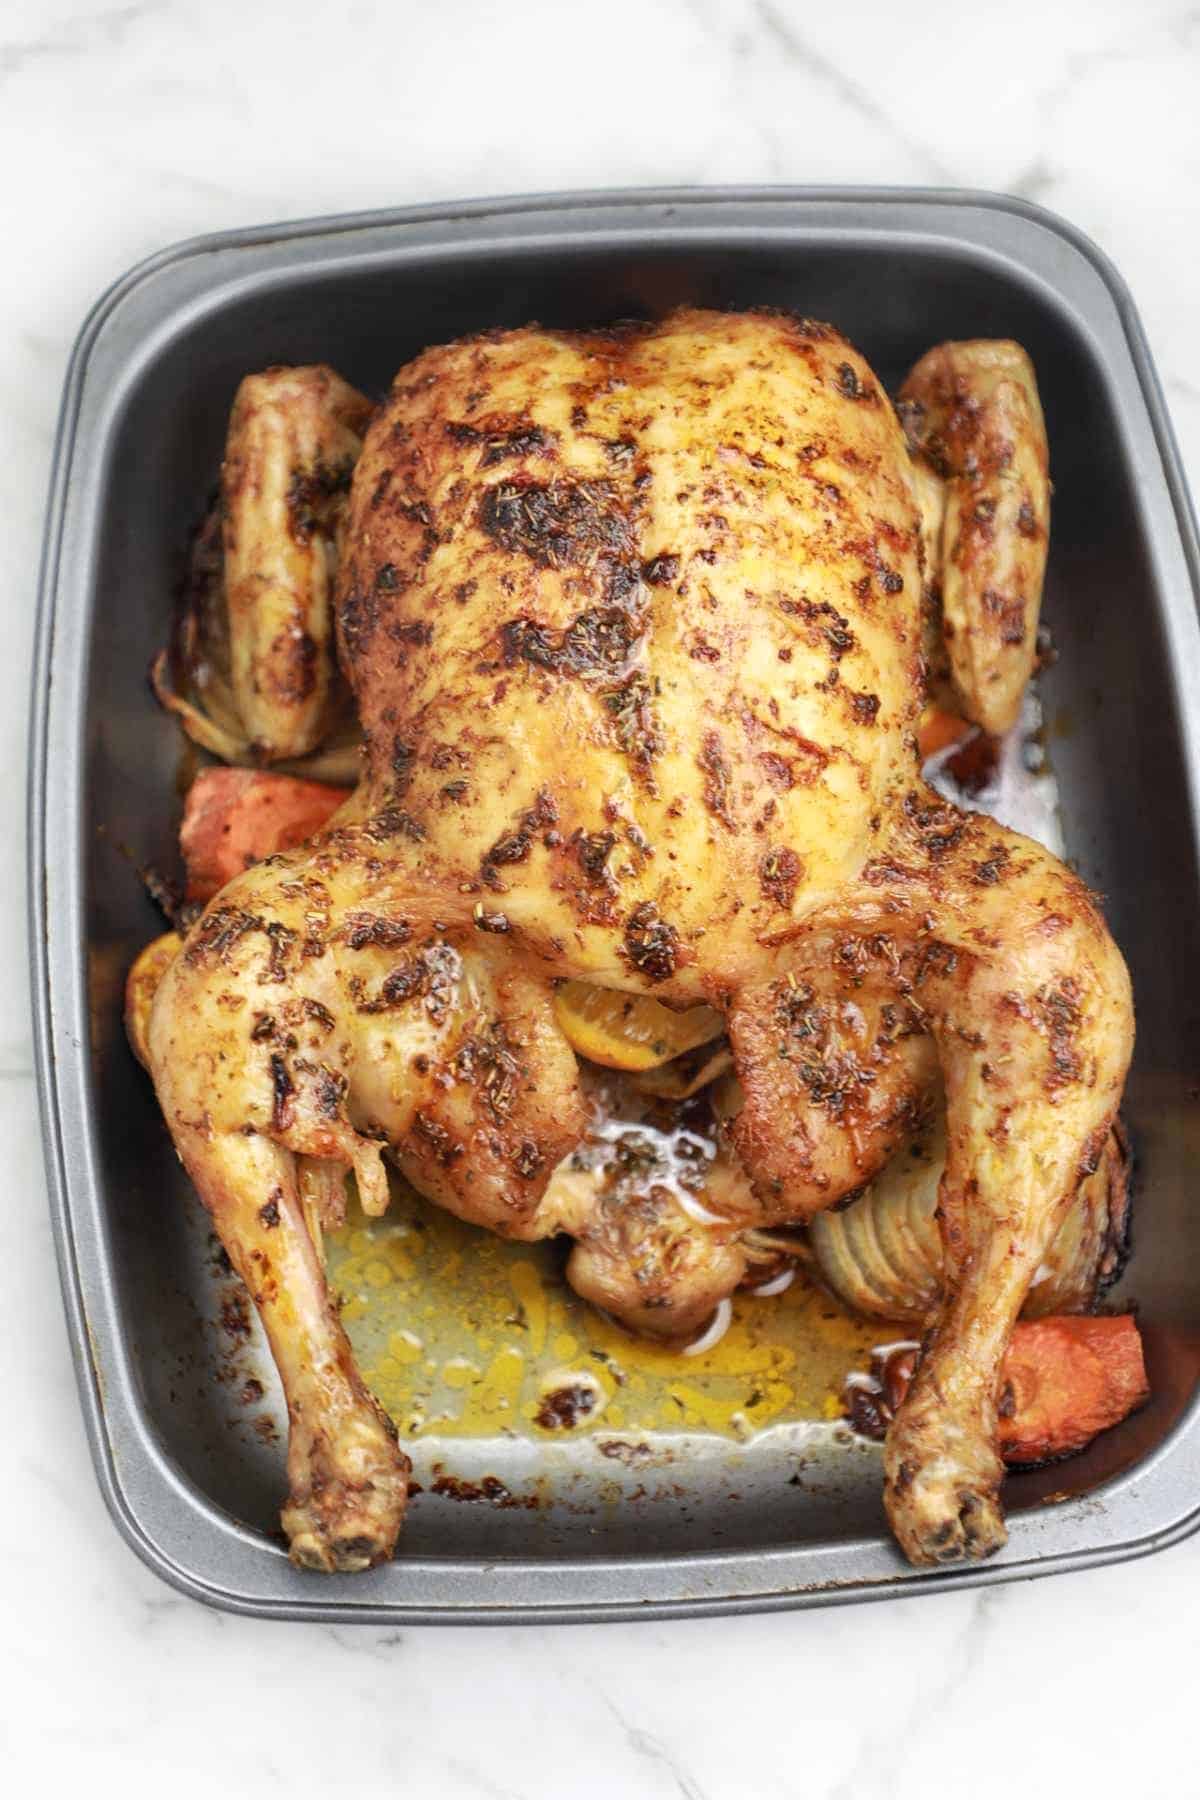 roast christmas chicken in a baking tray.